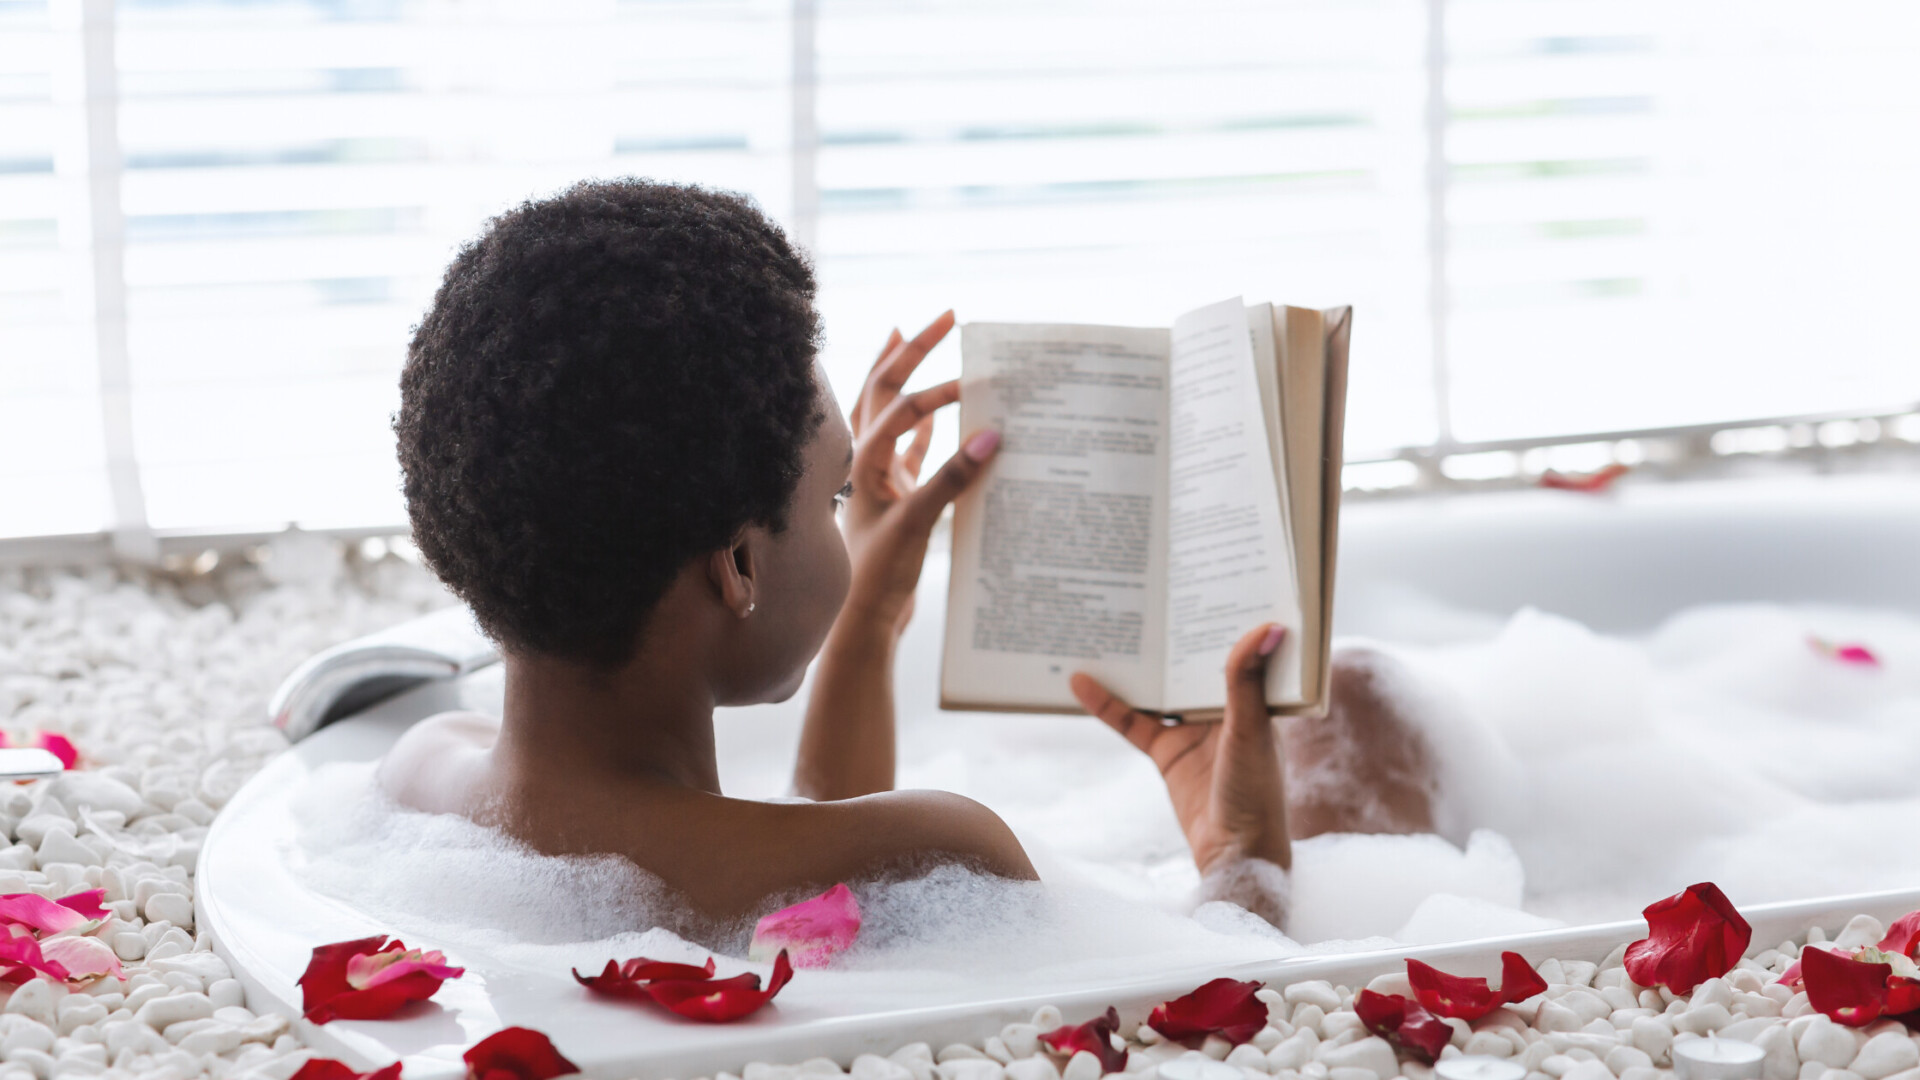 A woman enjoys a relaxing bubble bath on valentine's day self-caring with rose petals, reading a book surrounded by white pebbles and natural light.